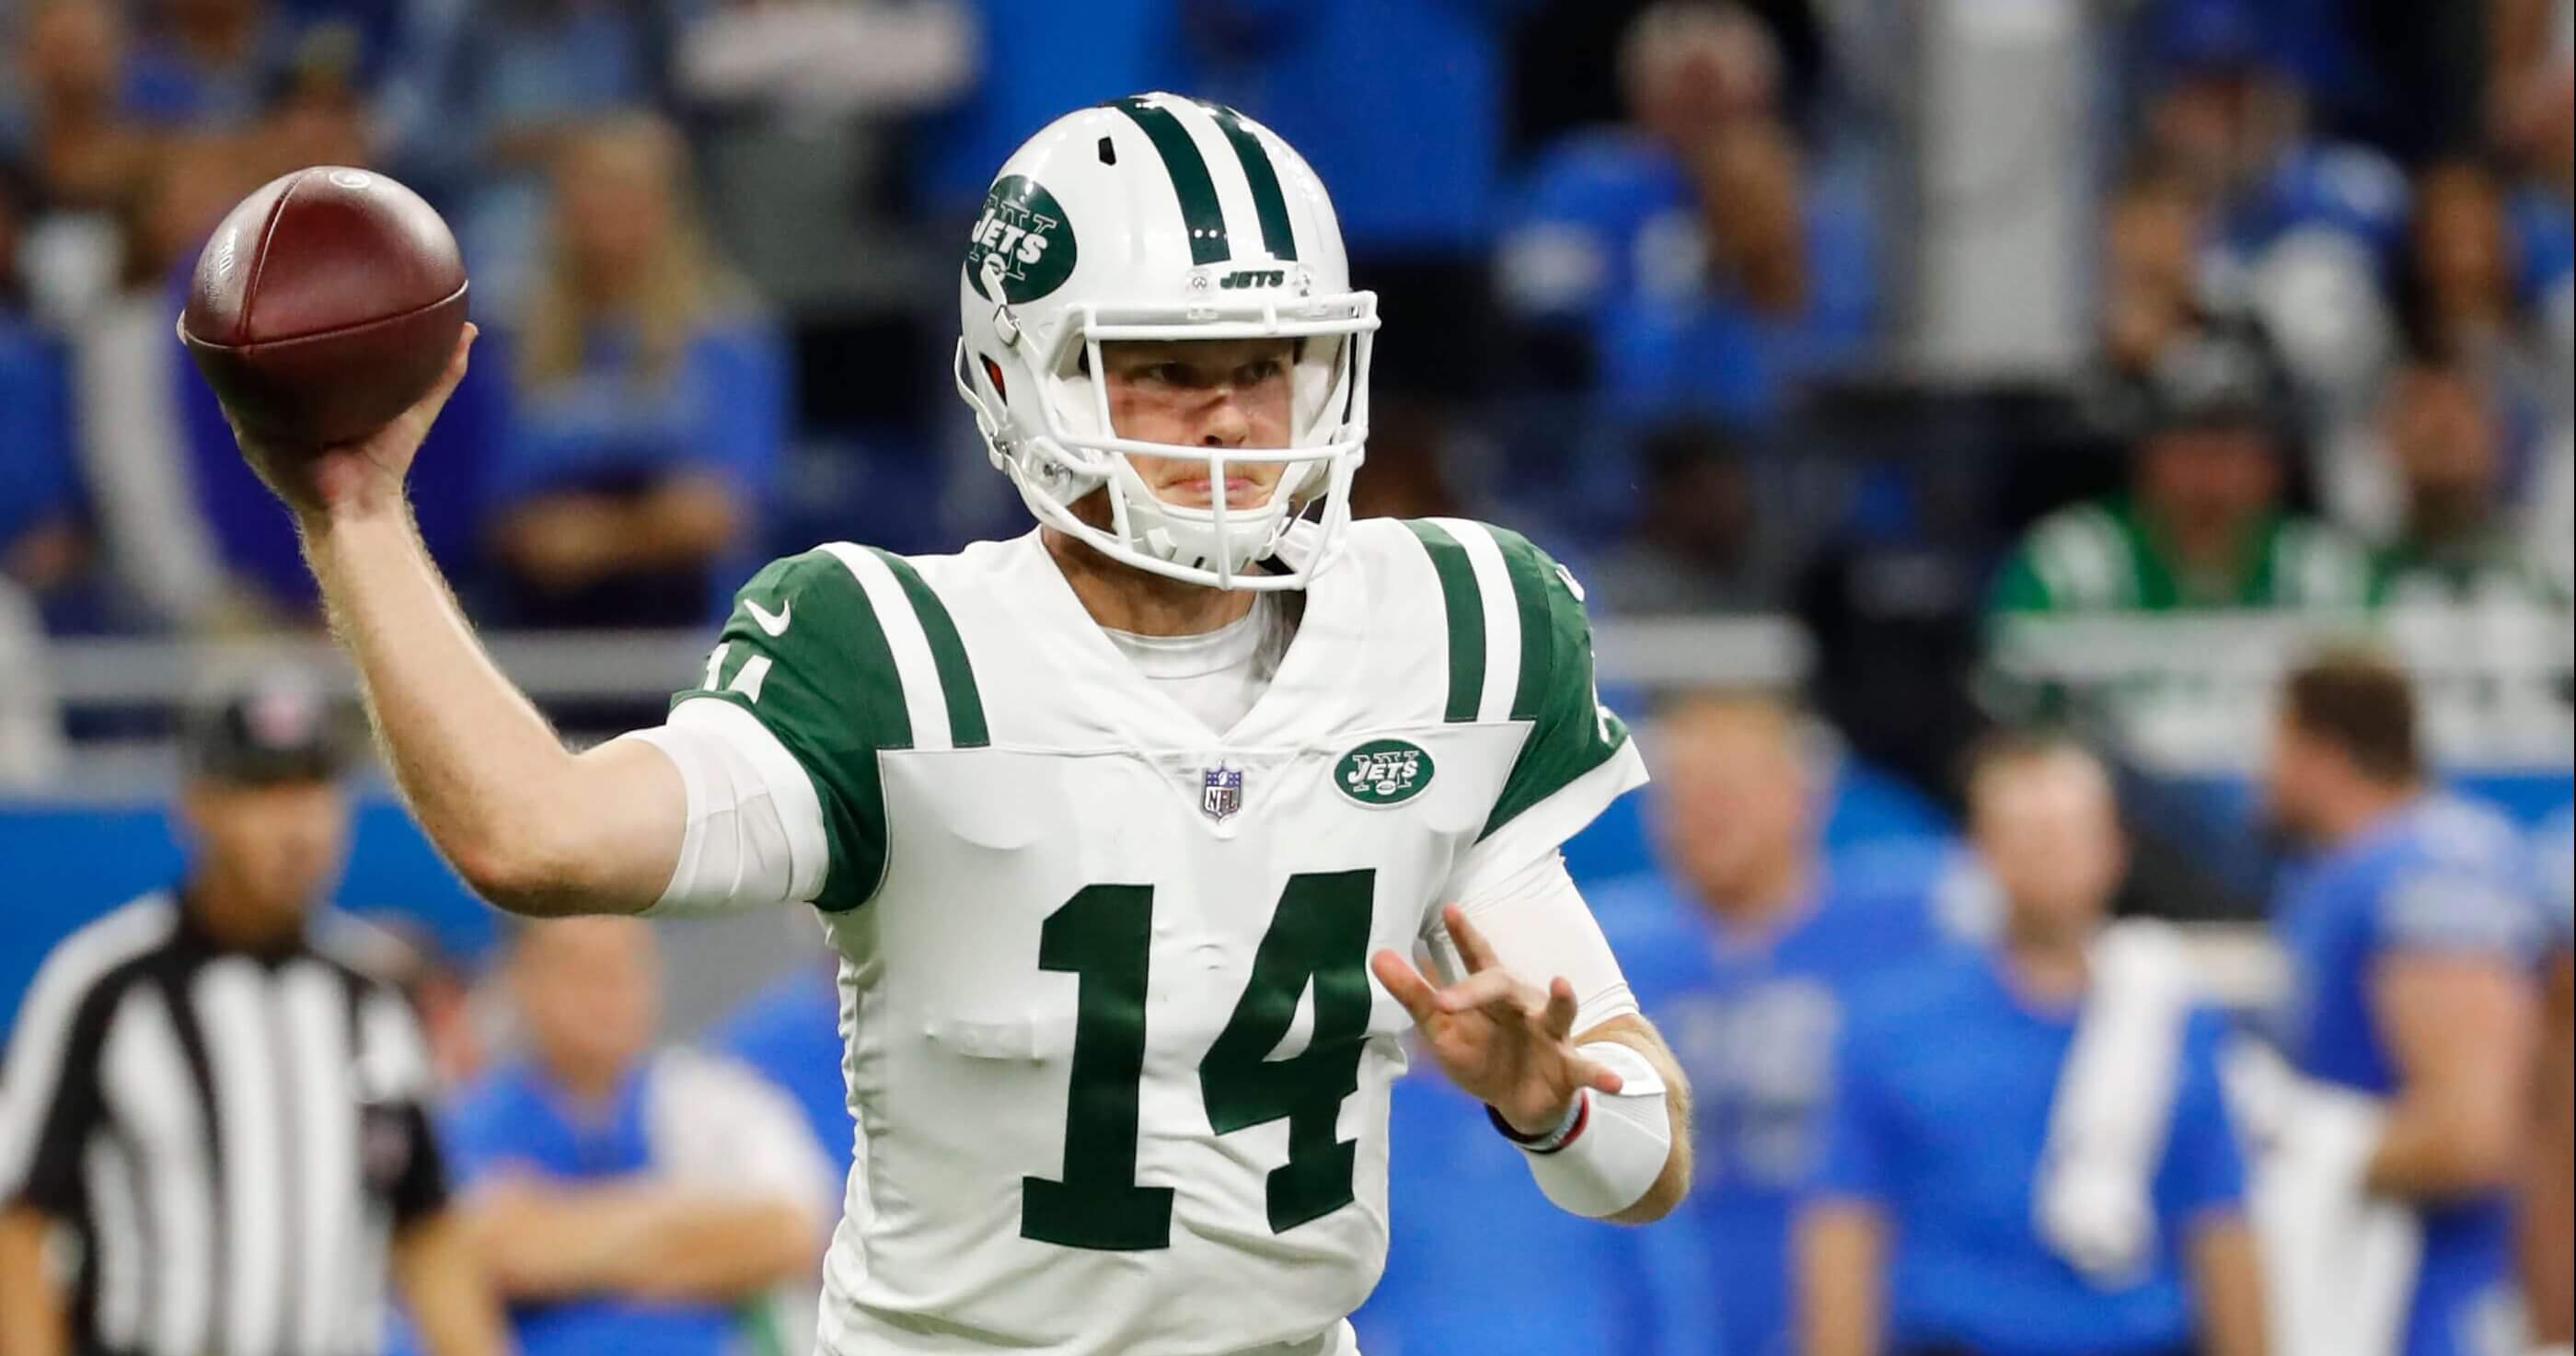 Jets rookie quarterback Sam Darnold throws a pass against the Lions in the first half of New York's season opener Monday night in Detroit.